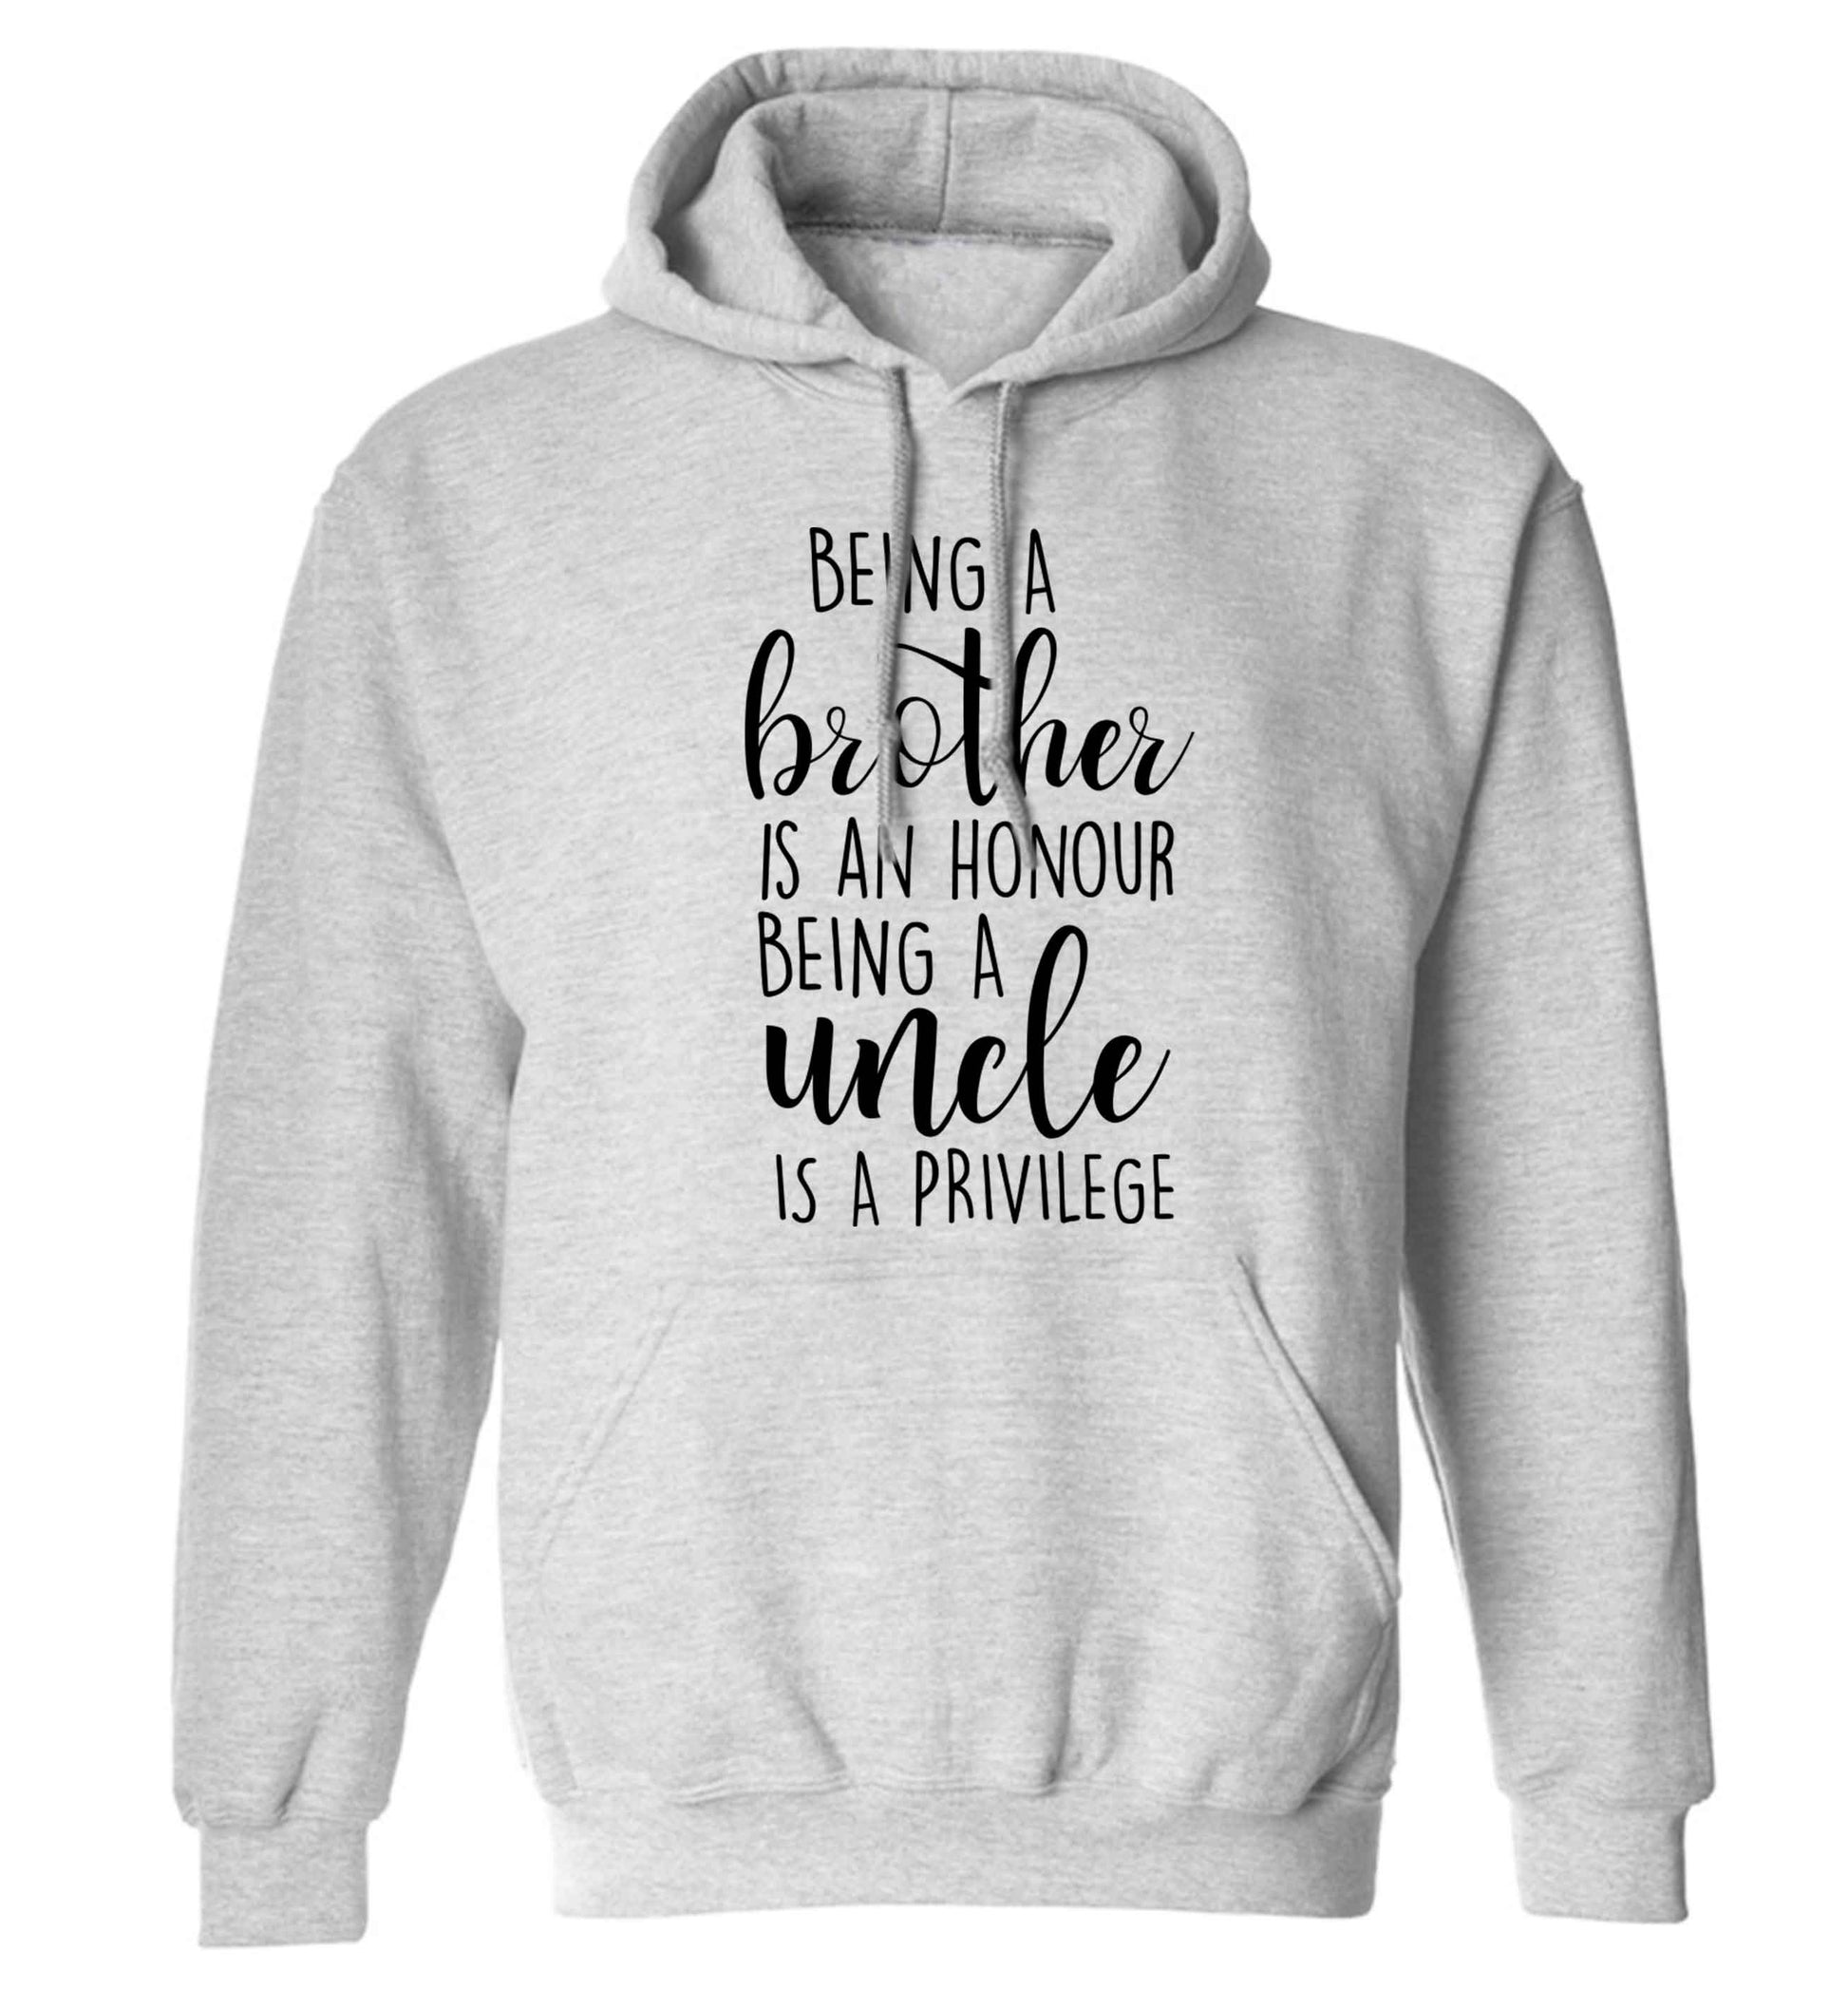 Being a brother is an honour being an uncle is a privilege adults unisex grey hoodie 2XL